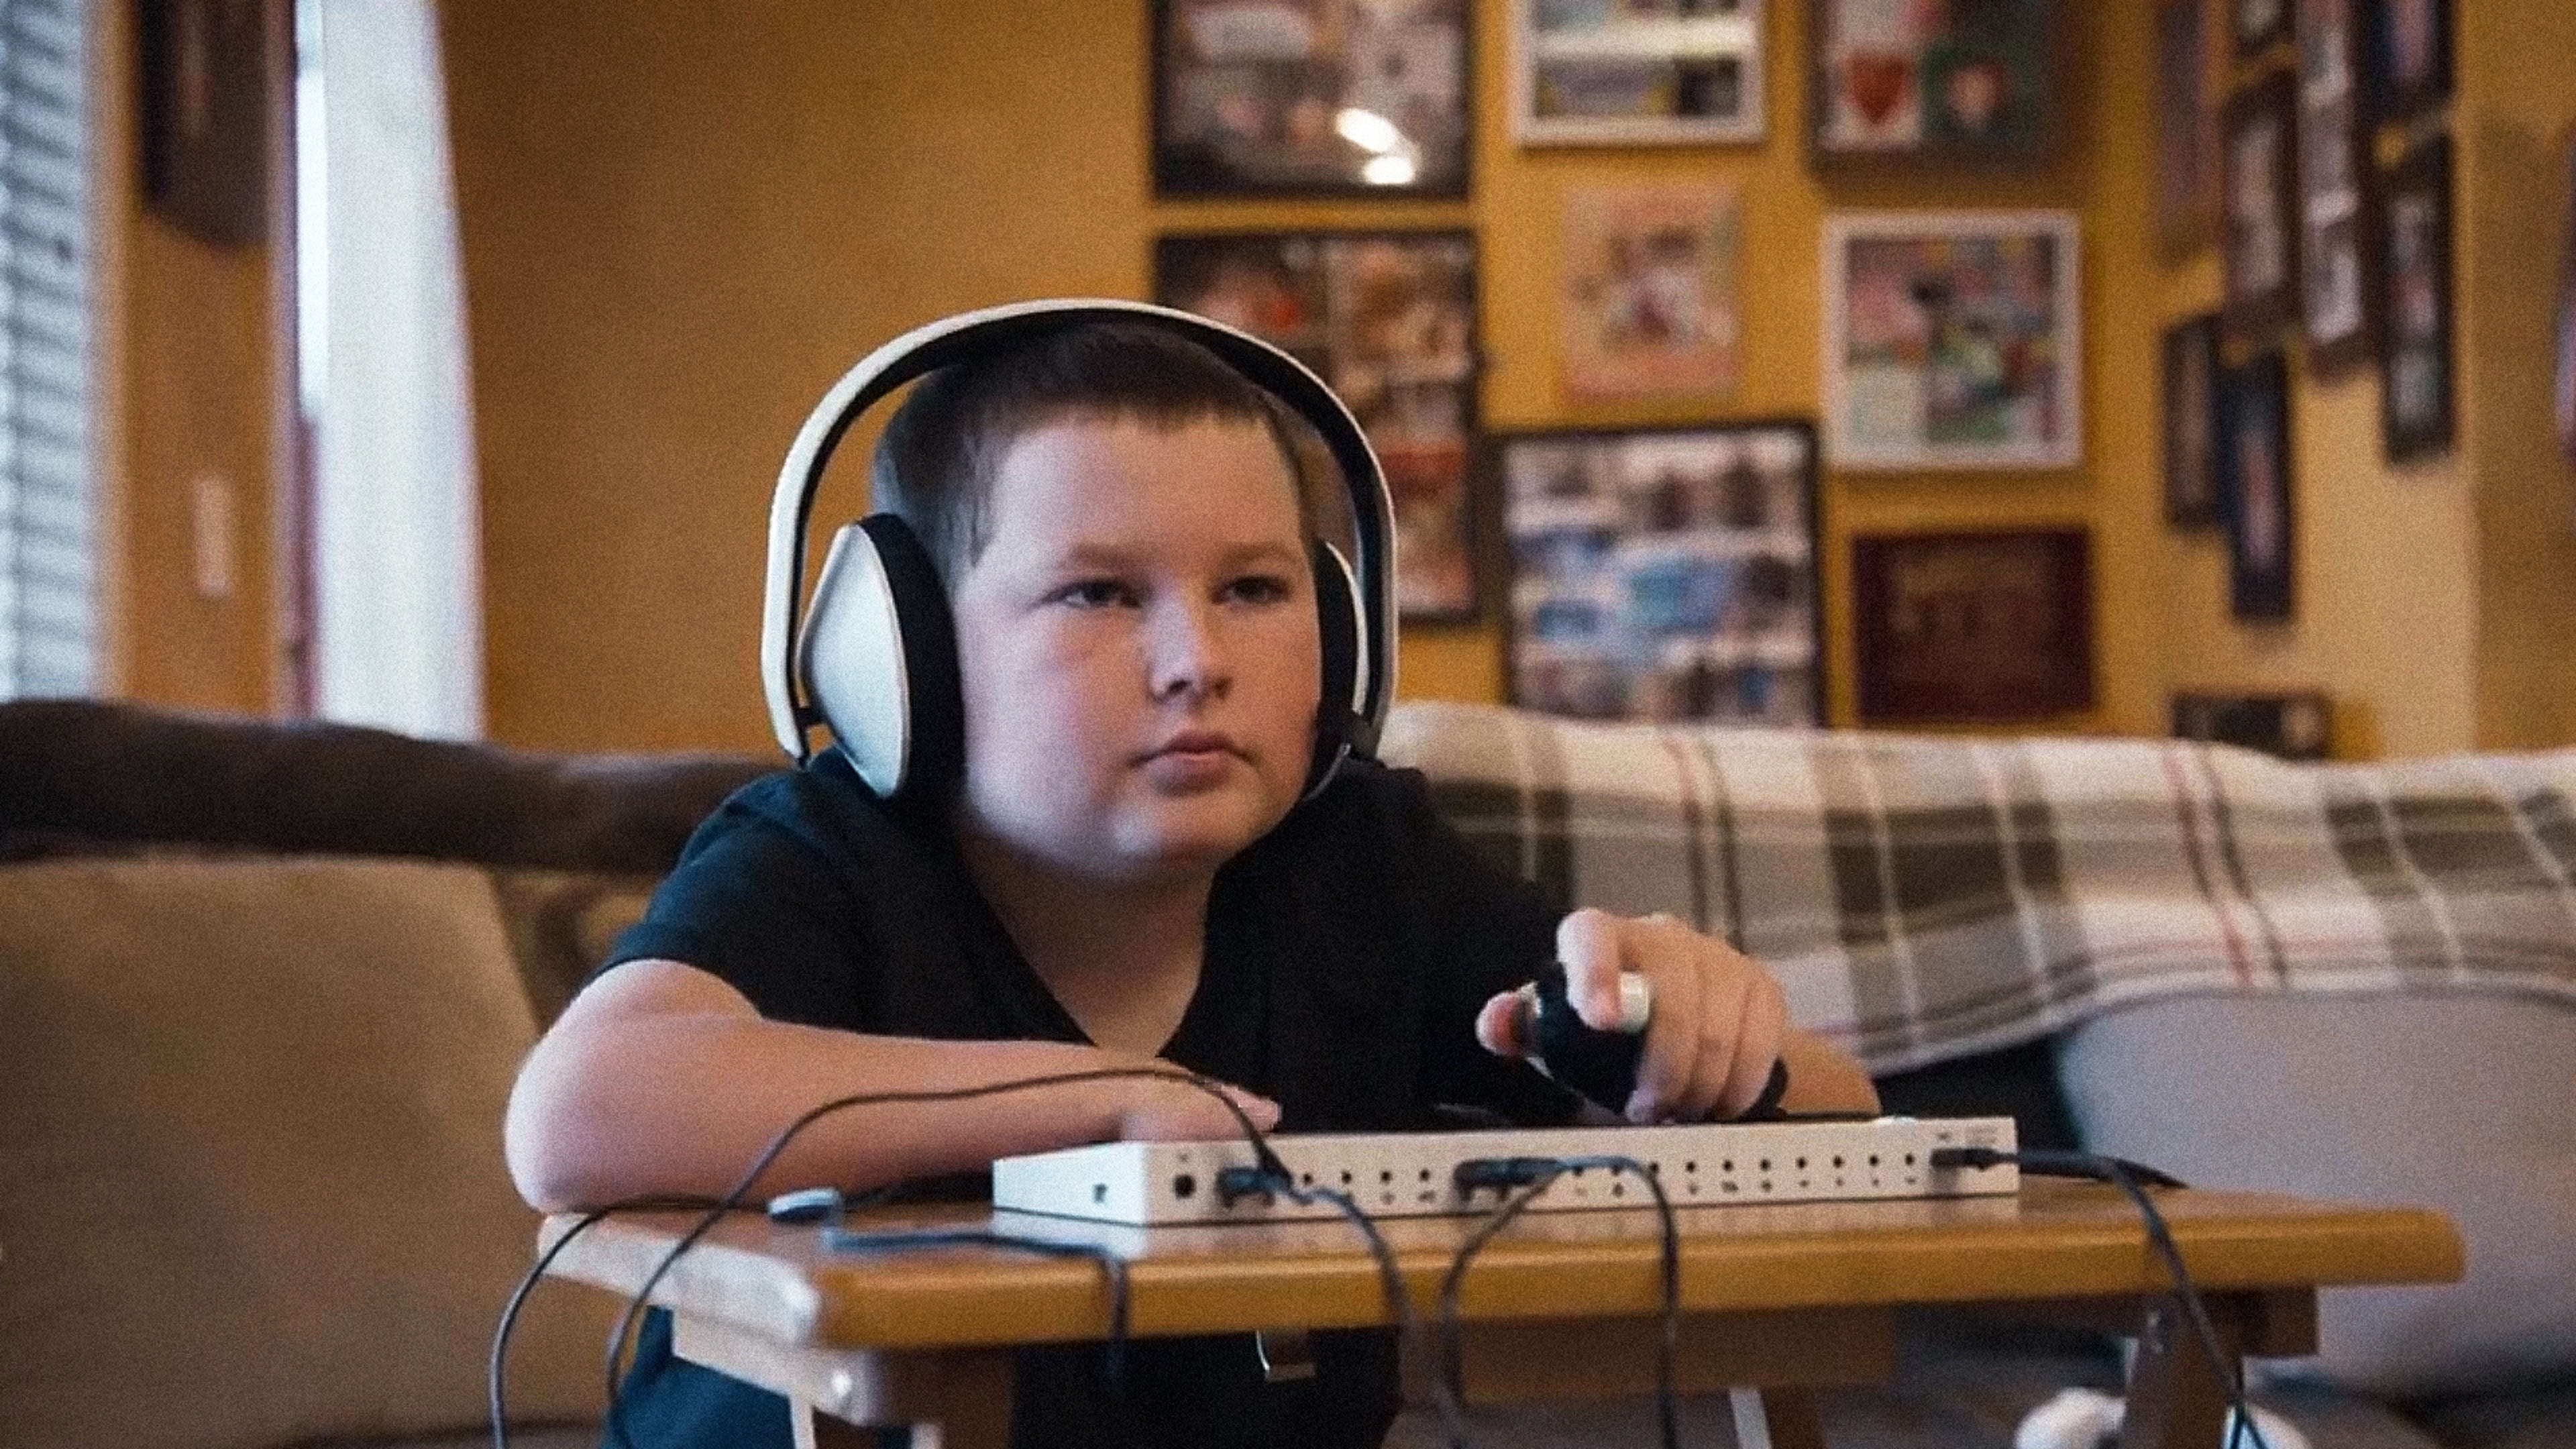 Microsoft’s Super Bowl ad will make you cry–over a video game controller